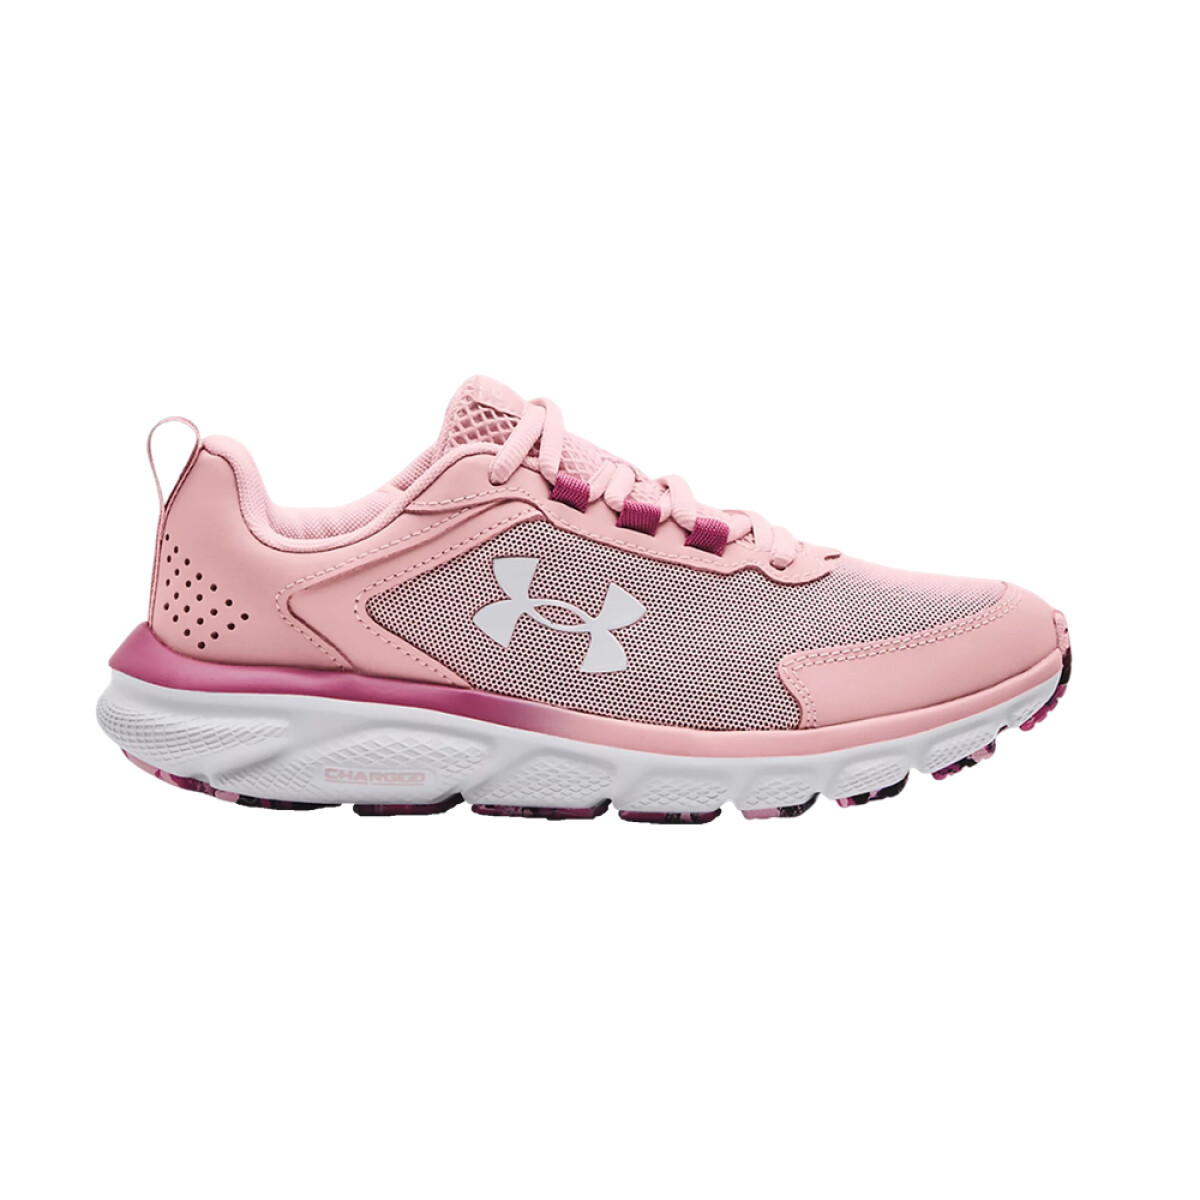 UNDER ARMOUR CHARGED ASSERT 9 MARBLE - 600 